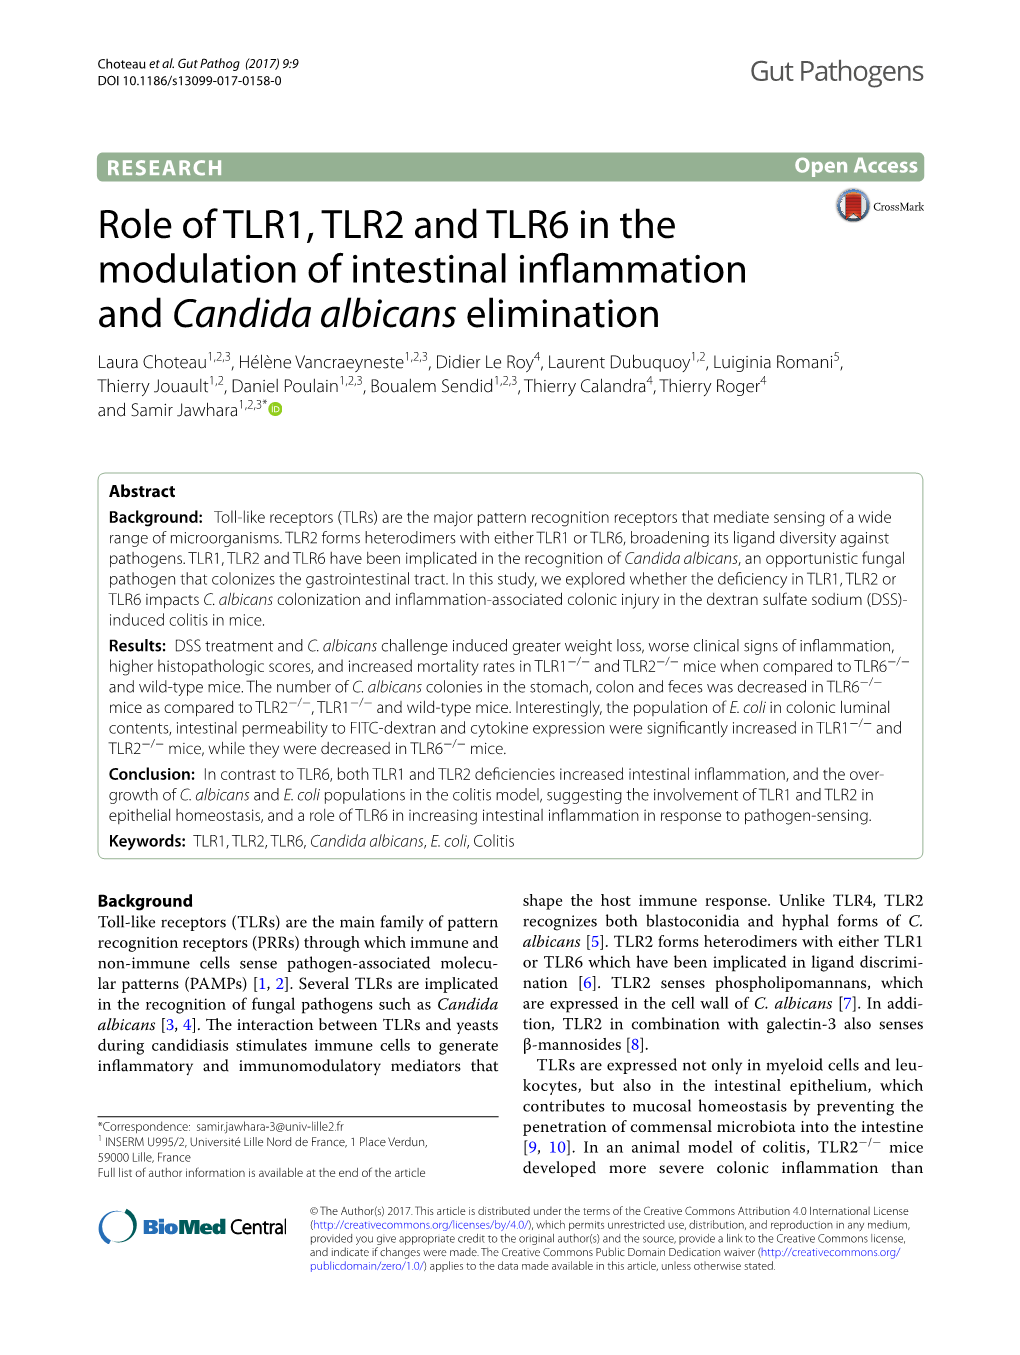 Role of TLR1, TLR2 and TLR6 in the Modulation of Intestinal